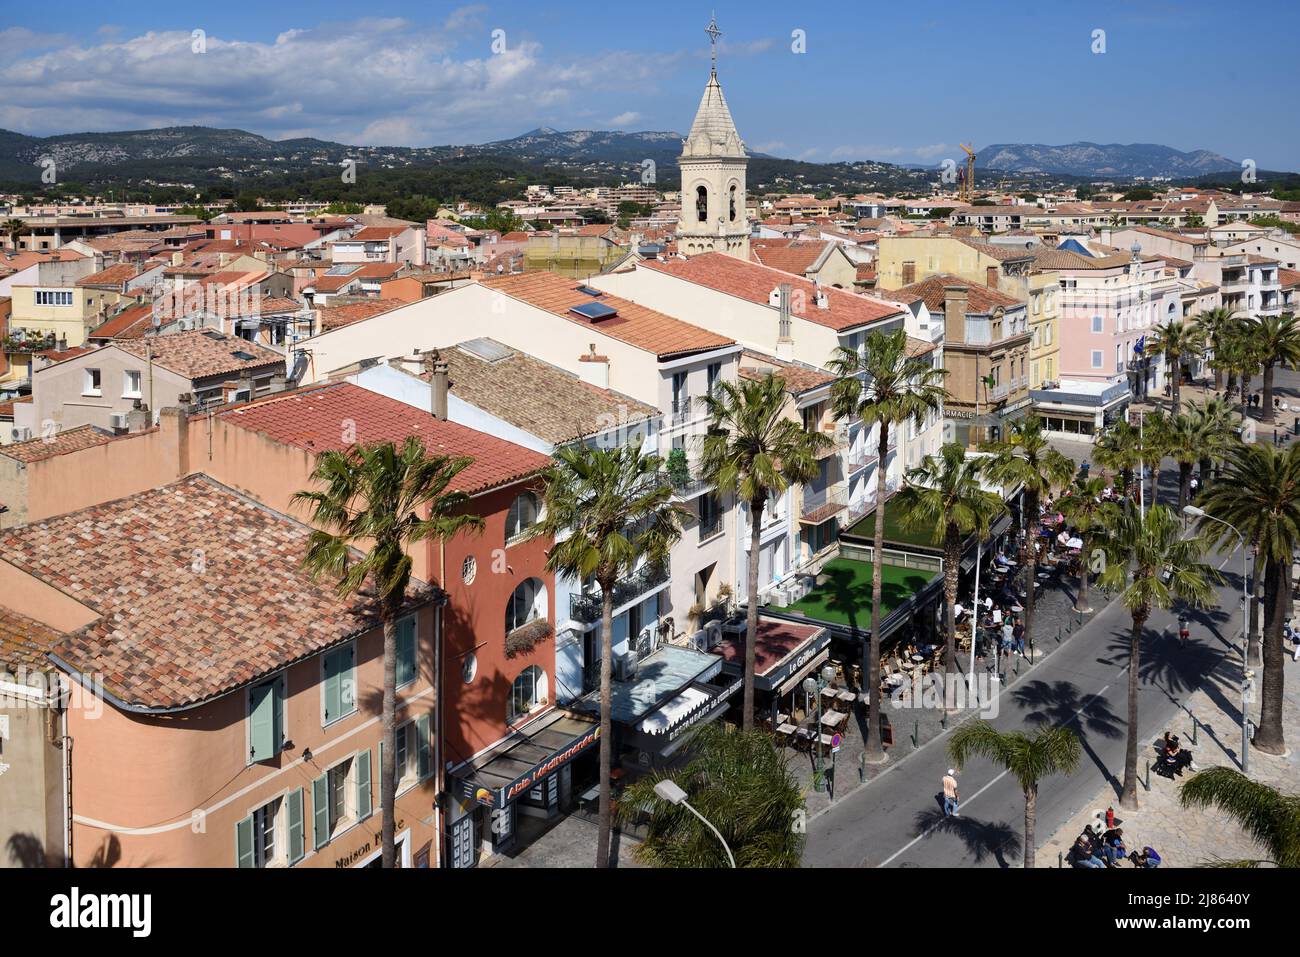 View over the Rooftops of the Old Town Sanary or Sanary-sur-Mer with Palm Trees on Seafront Var Côte-d'Azur or French Riviera Provence France Stock Photo